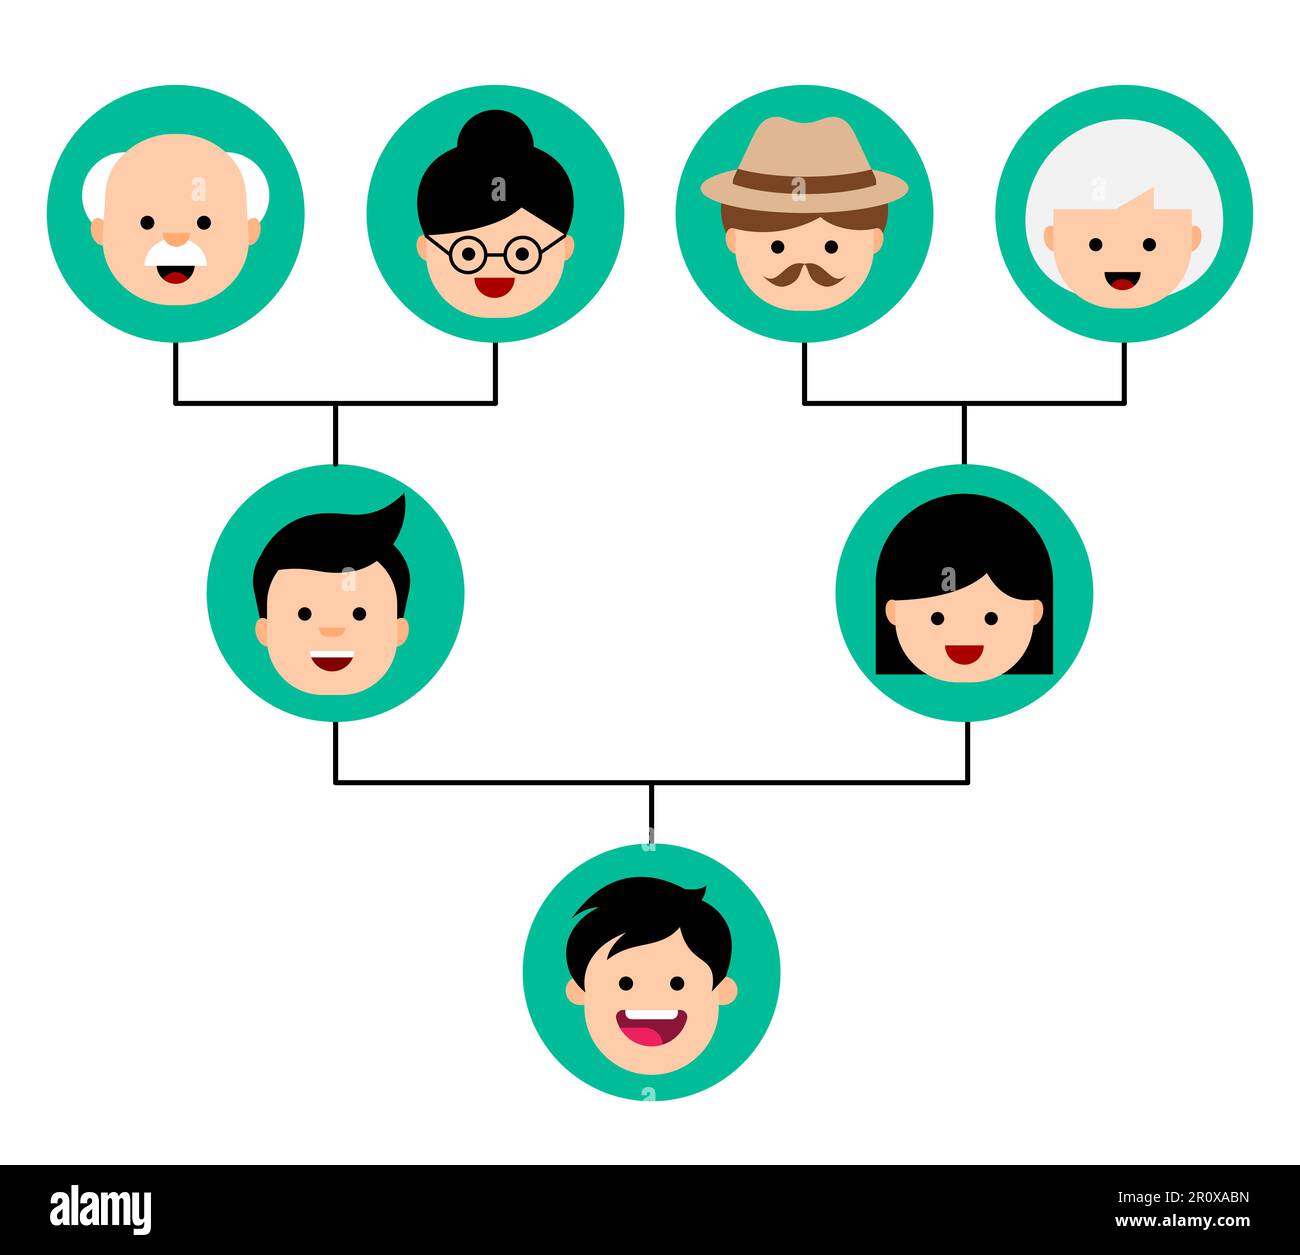 Genogram in cartoon style. Family tree chart. Genealogy tree structure. Can be used for ancestry heritage research, systematic constellation. Vector Stock Vector